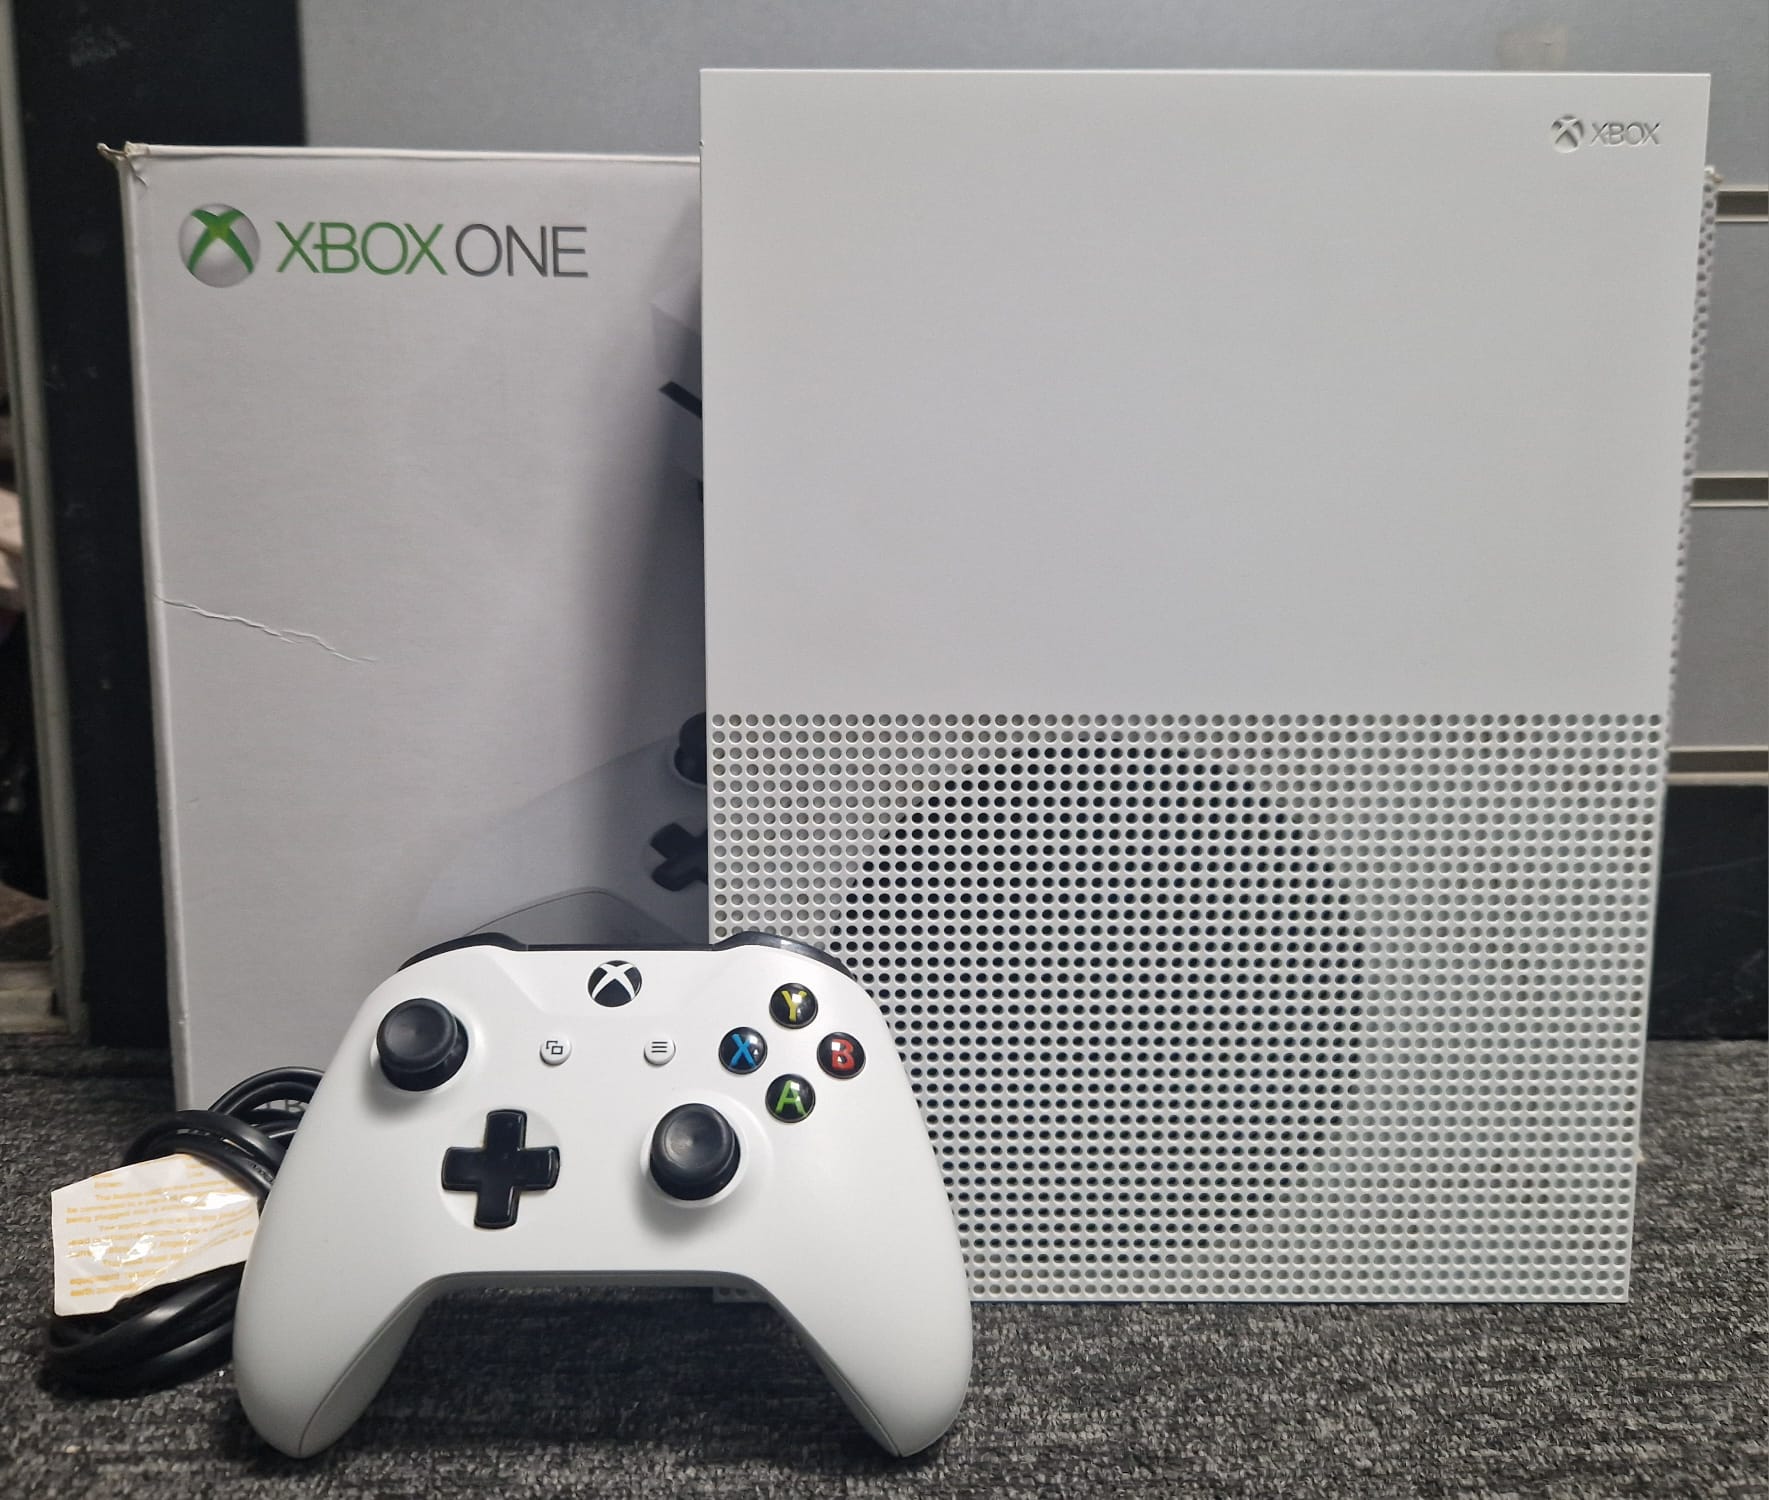 Microsoft Xbox One S 1TB Console with Controller - White + Box